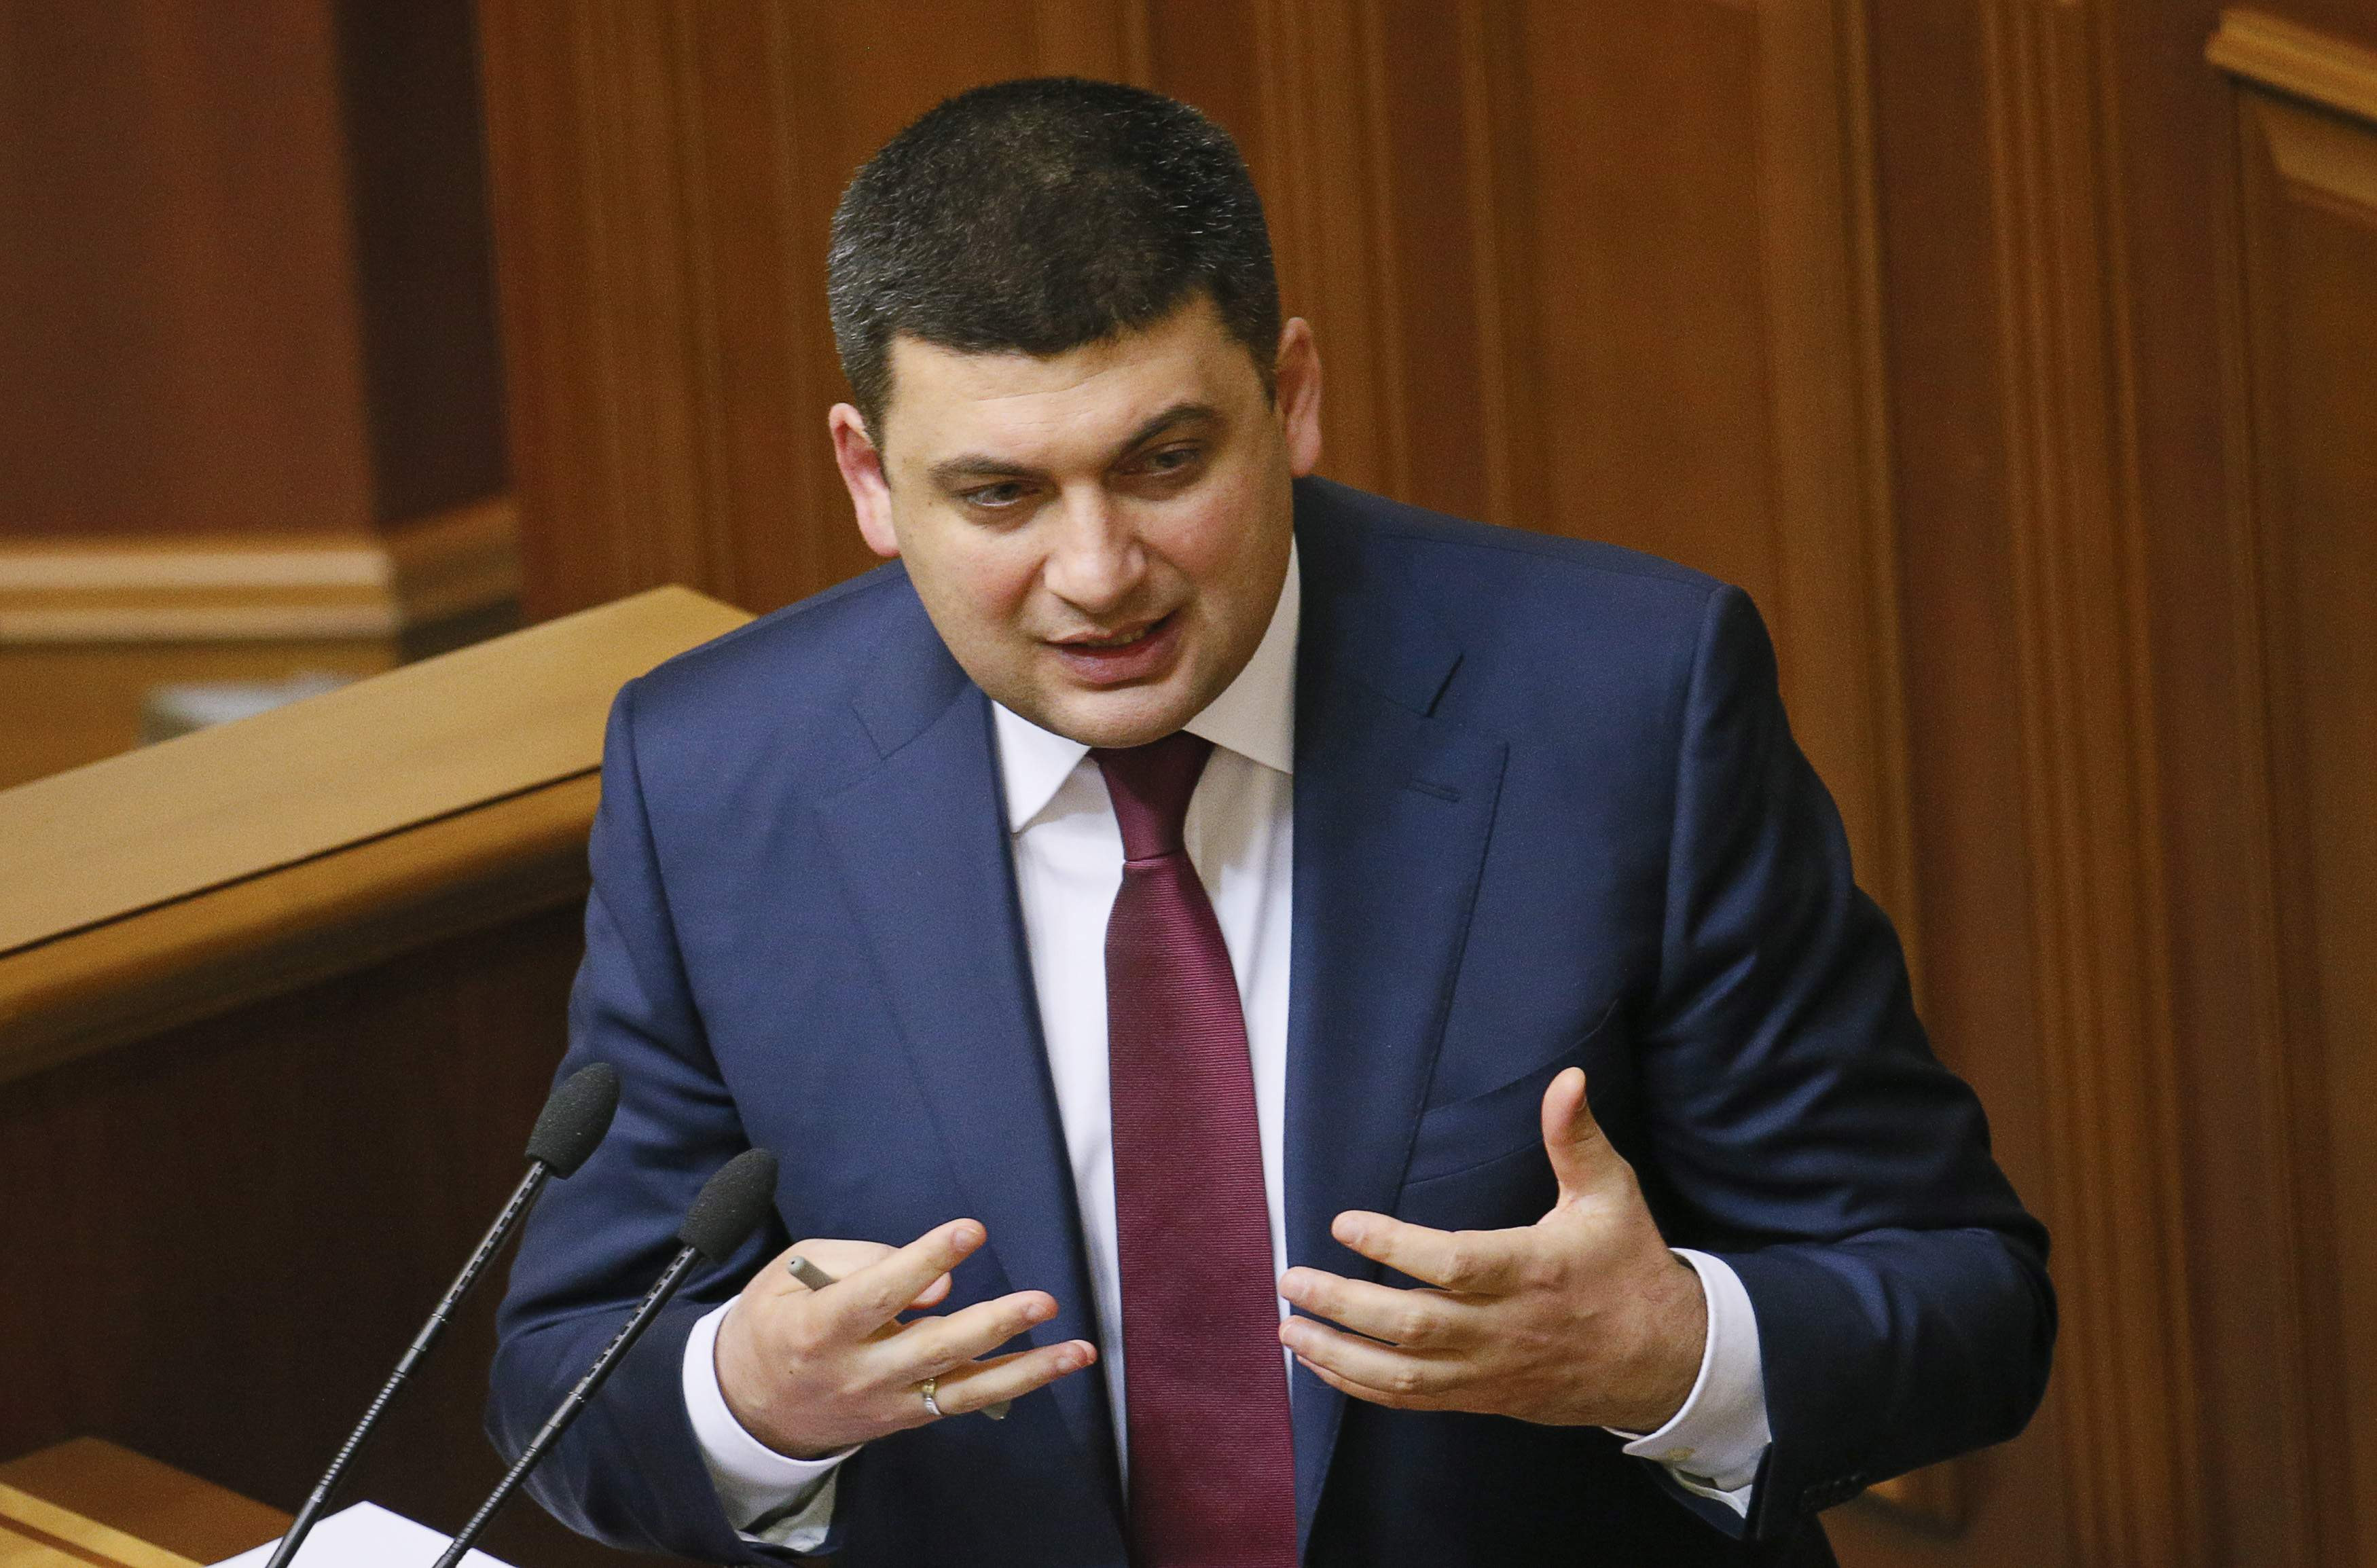 Ukraine's former Deputy PM Groysman speaks during a session of the parliament in Kiev